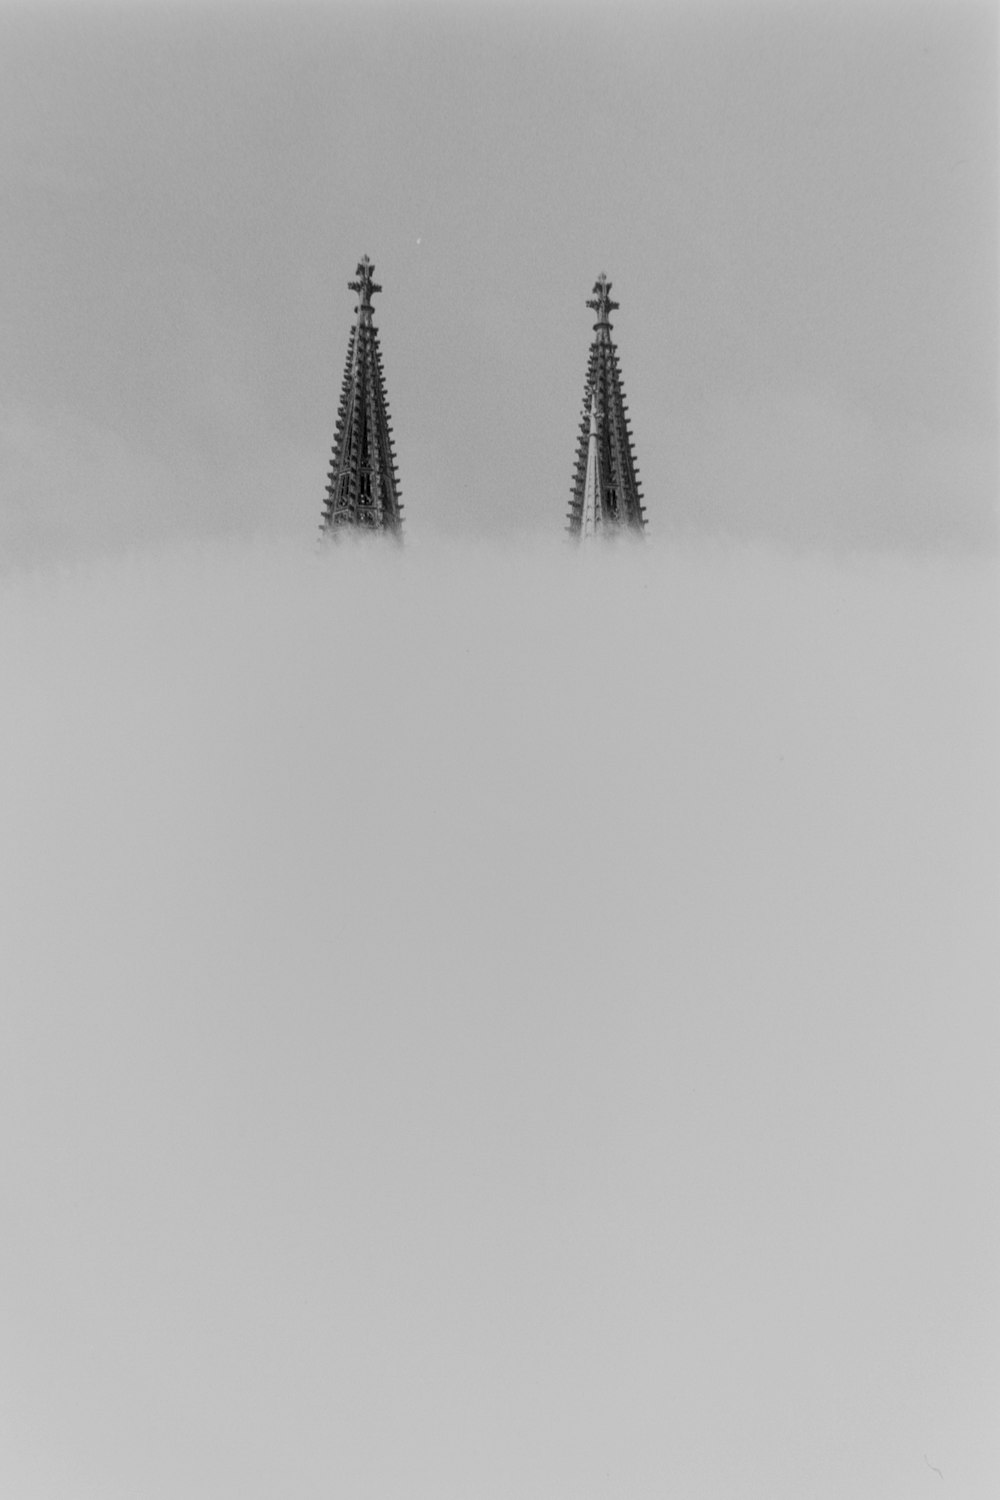 two towers with smoke coming out of them